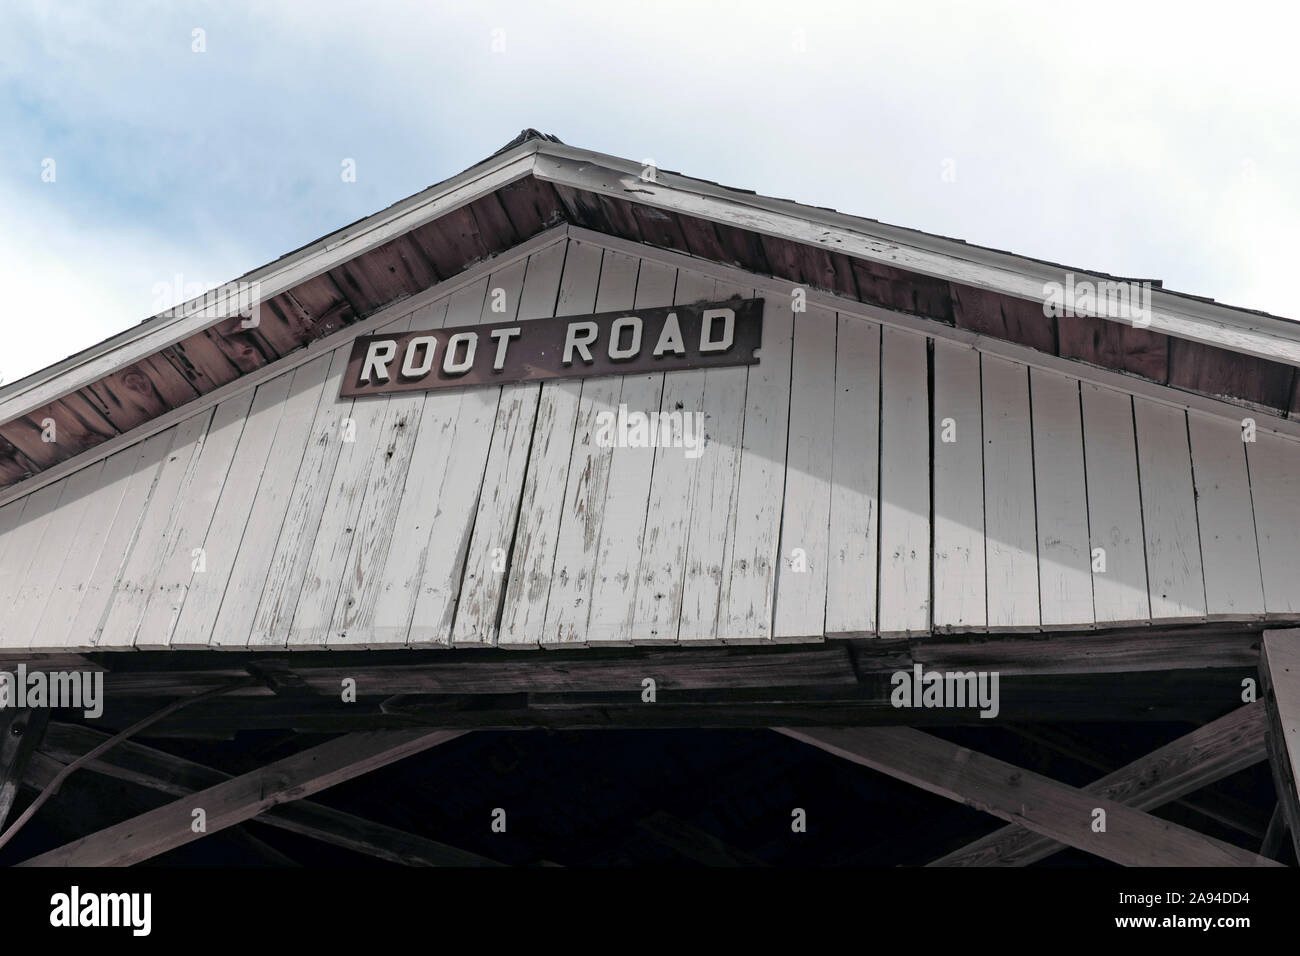 The Root Road Bridge is one of 19 wooden covered bridges in Ashtabula County in Northeast Ohio USA. Stock Photo